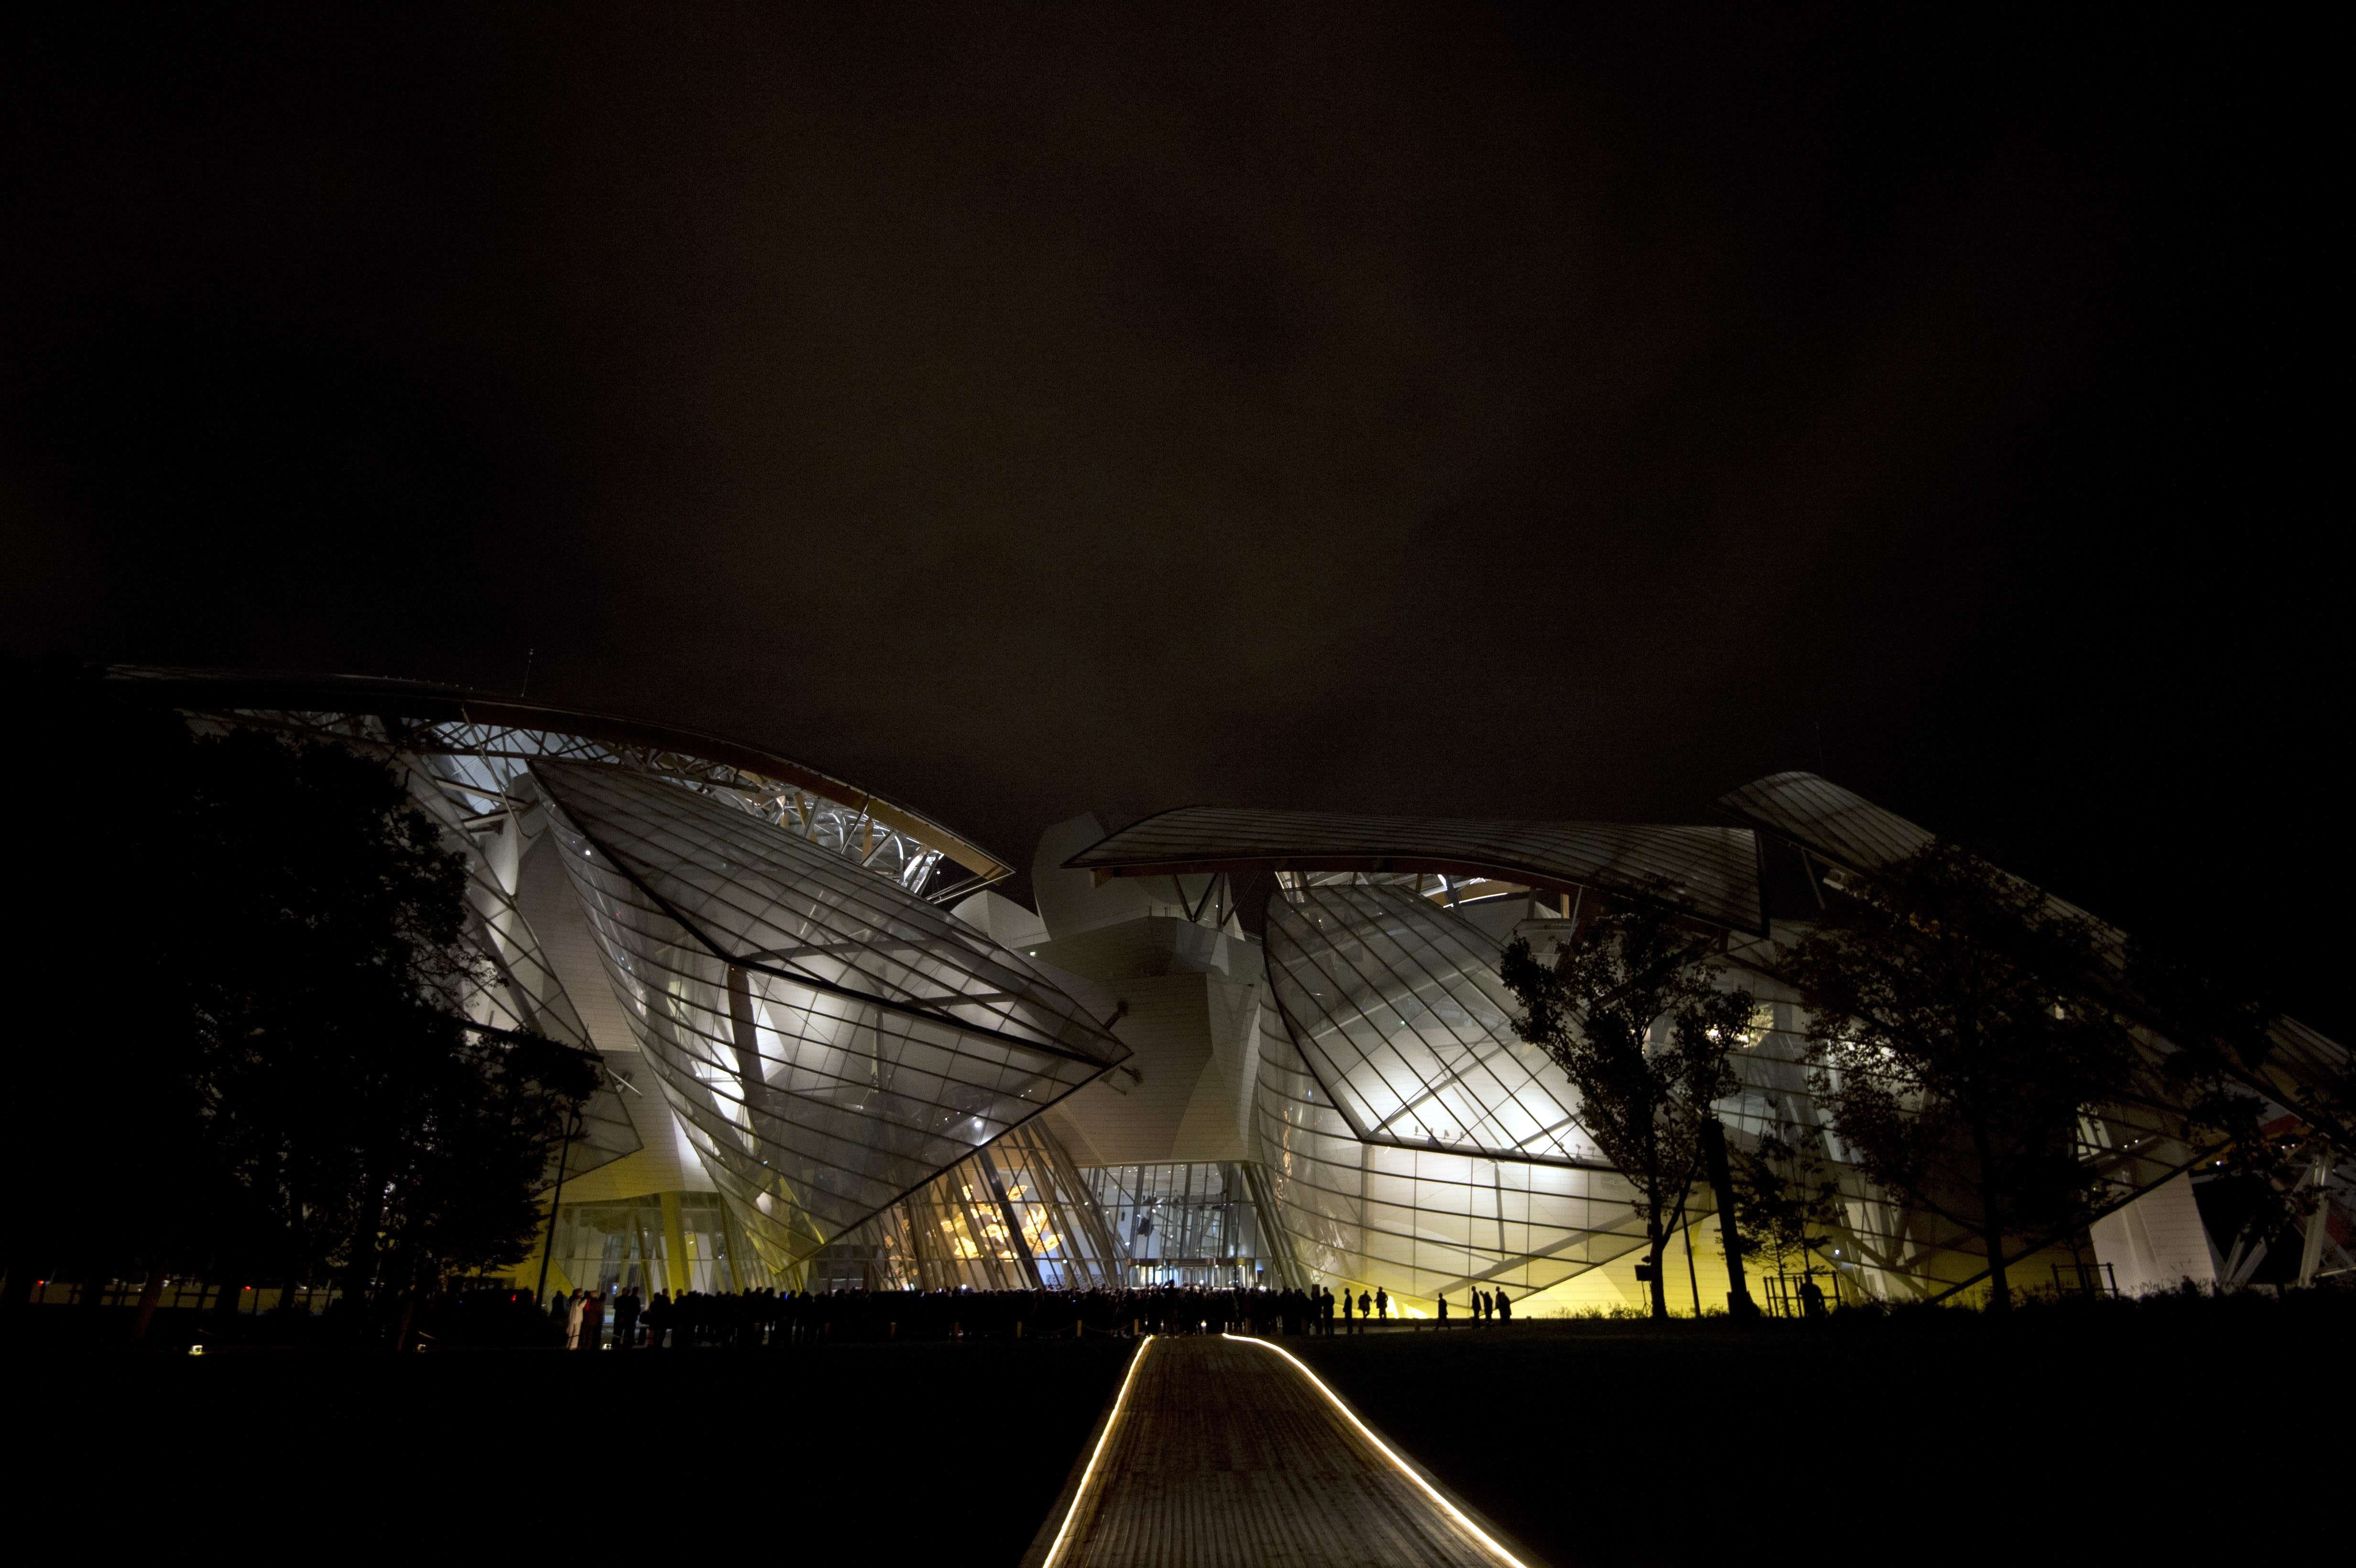 The Louis Vuitton museum is stunning – AND A THOUSAND WORDS